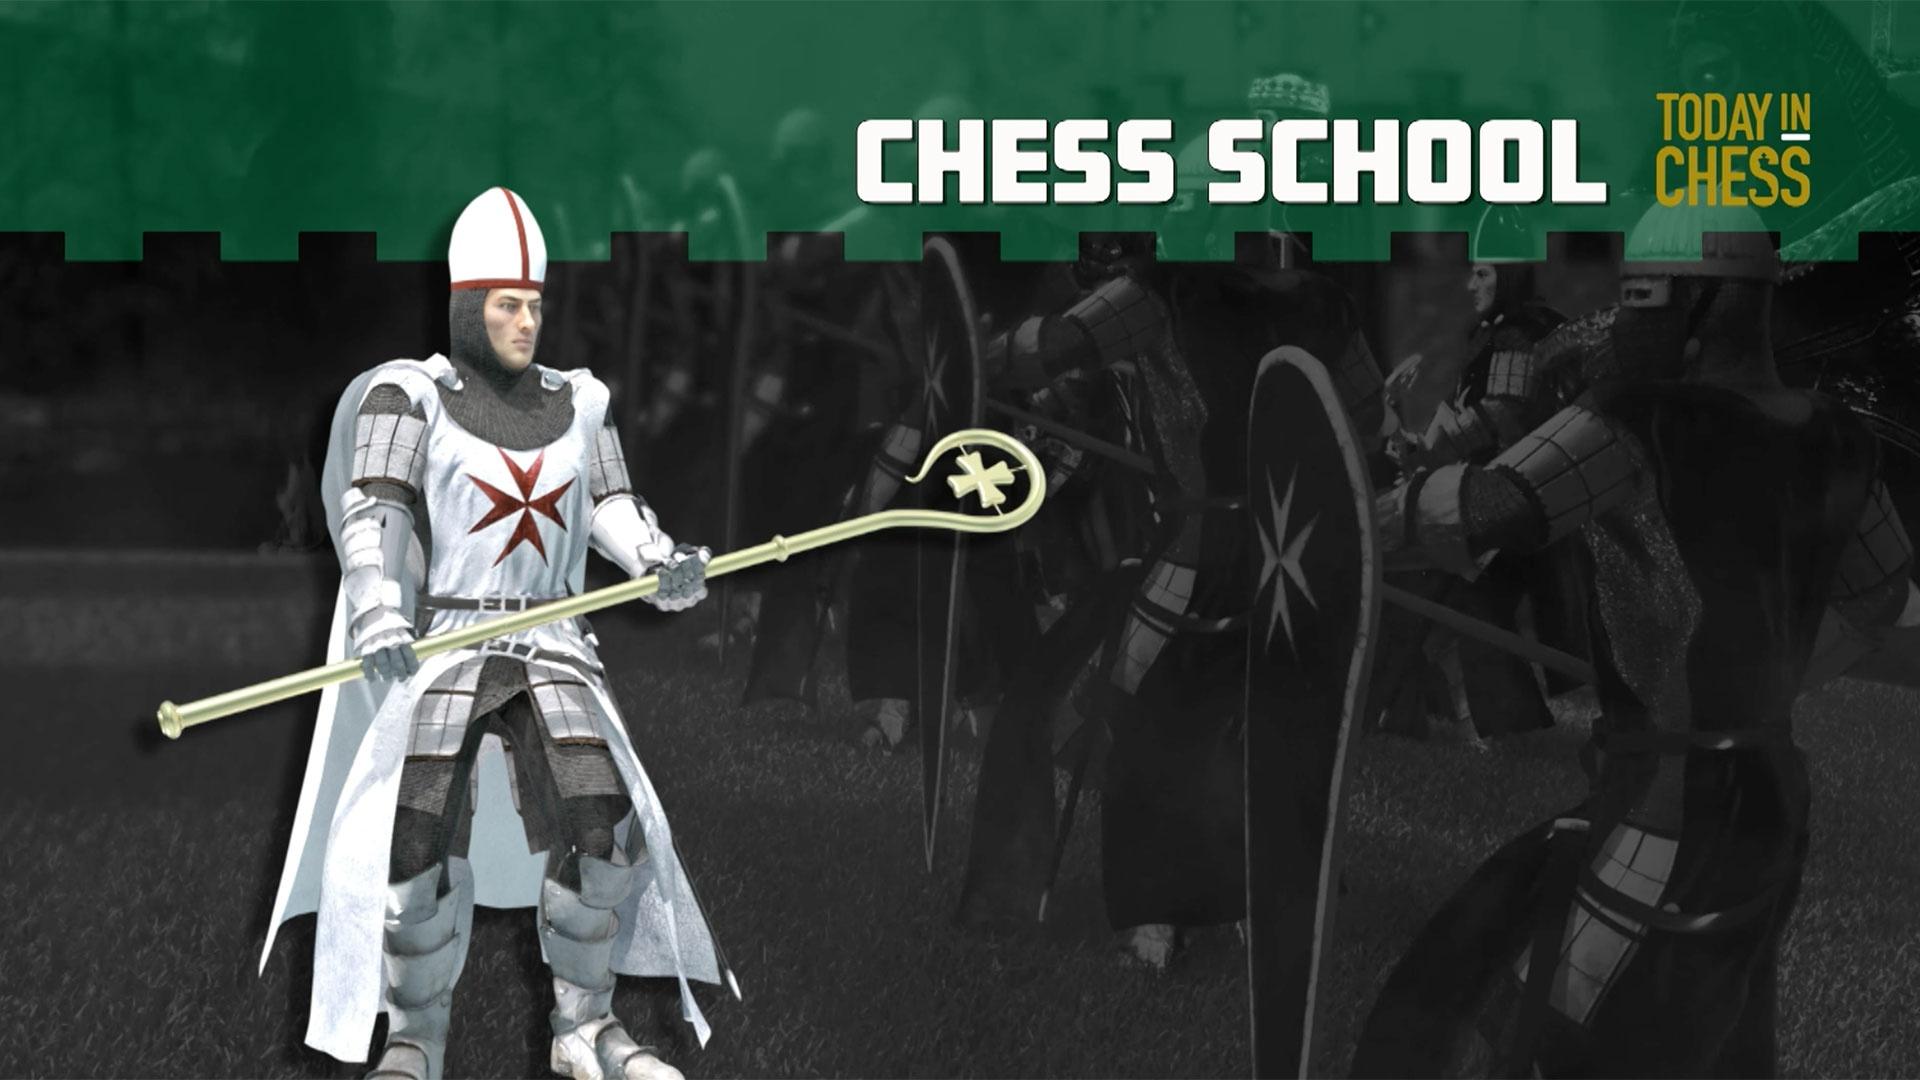 Introduction to Today in Chess